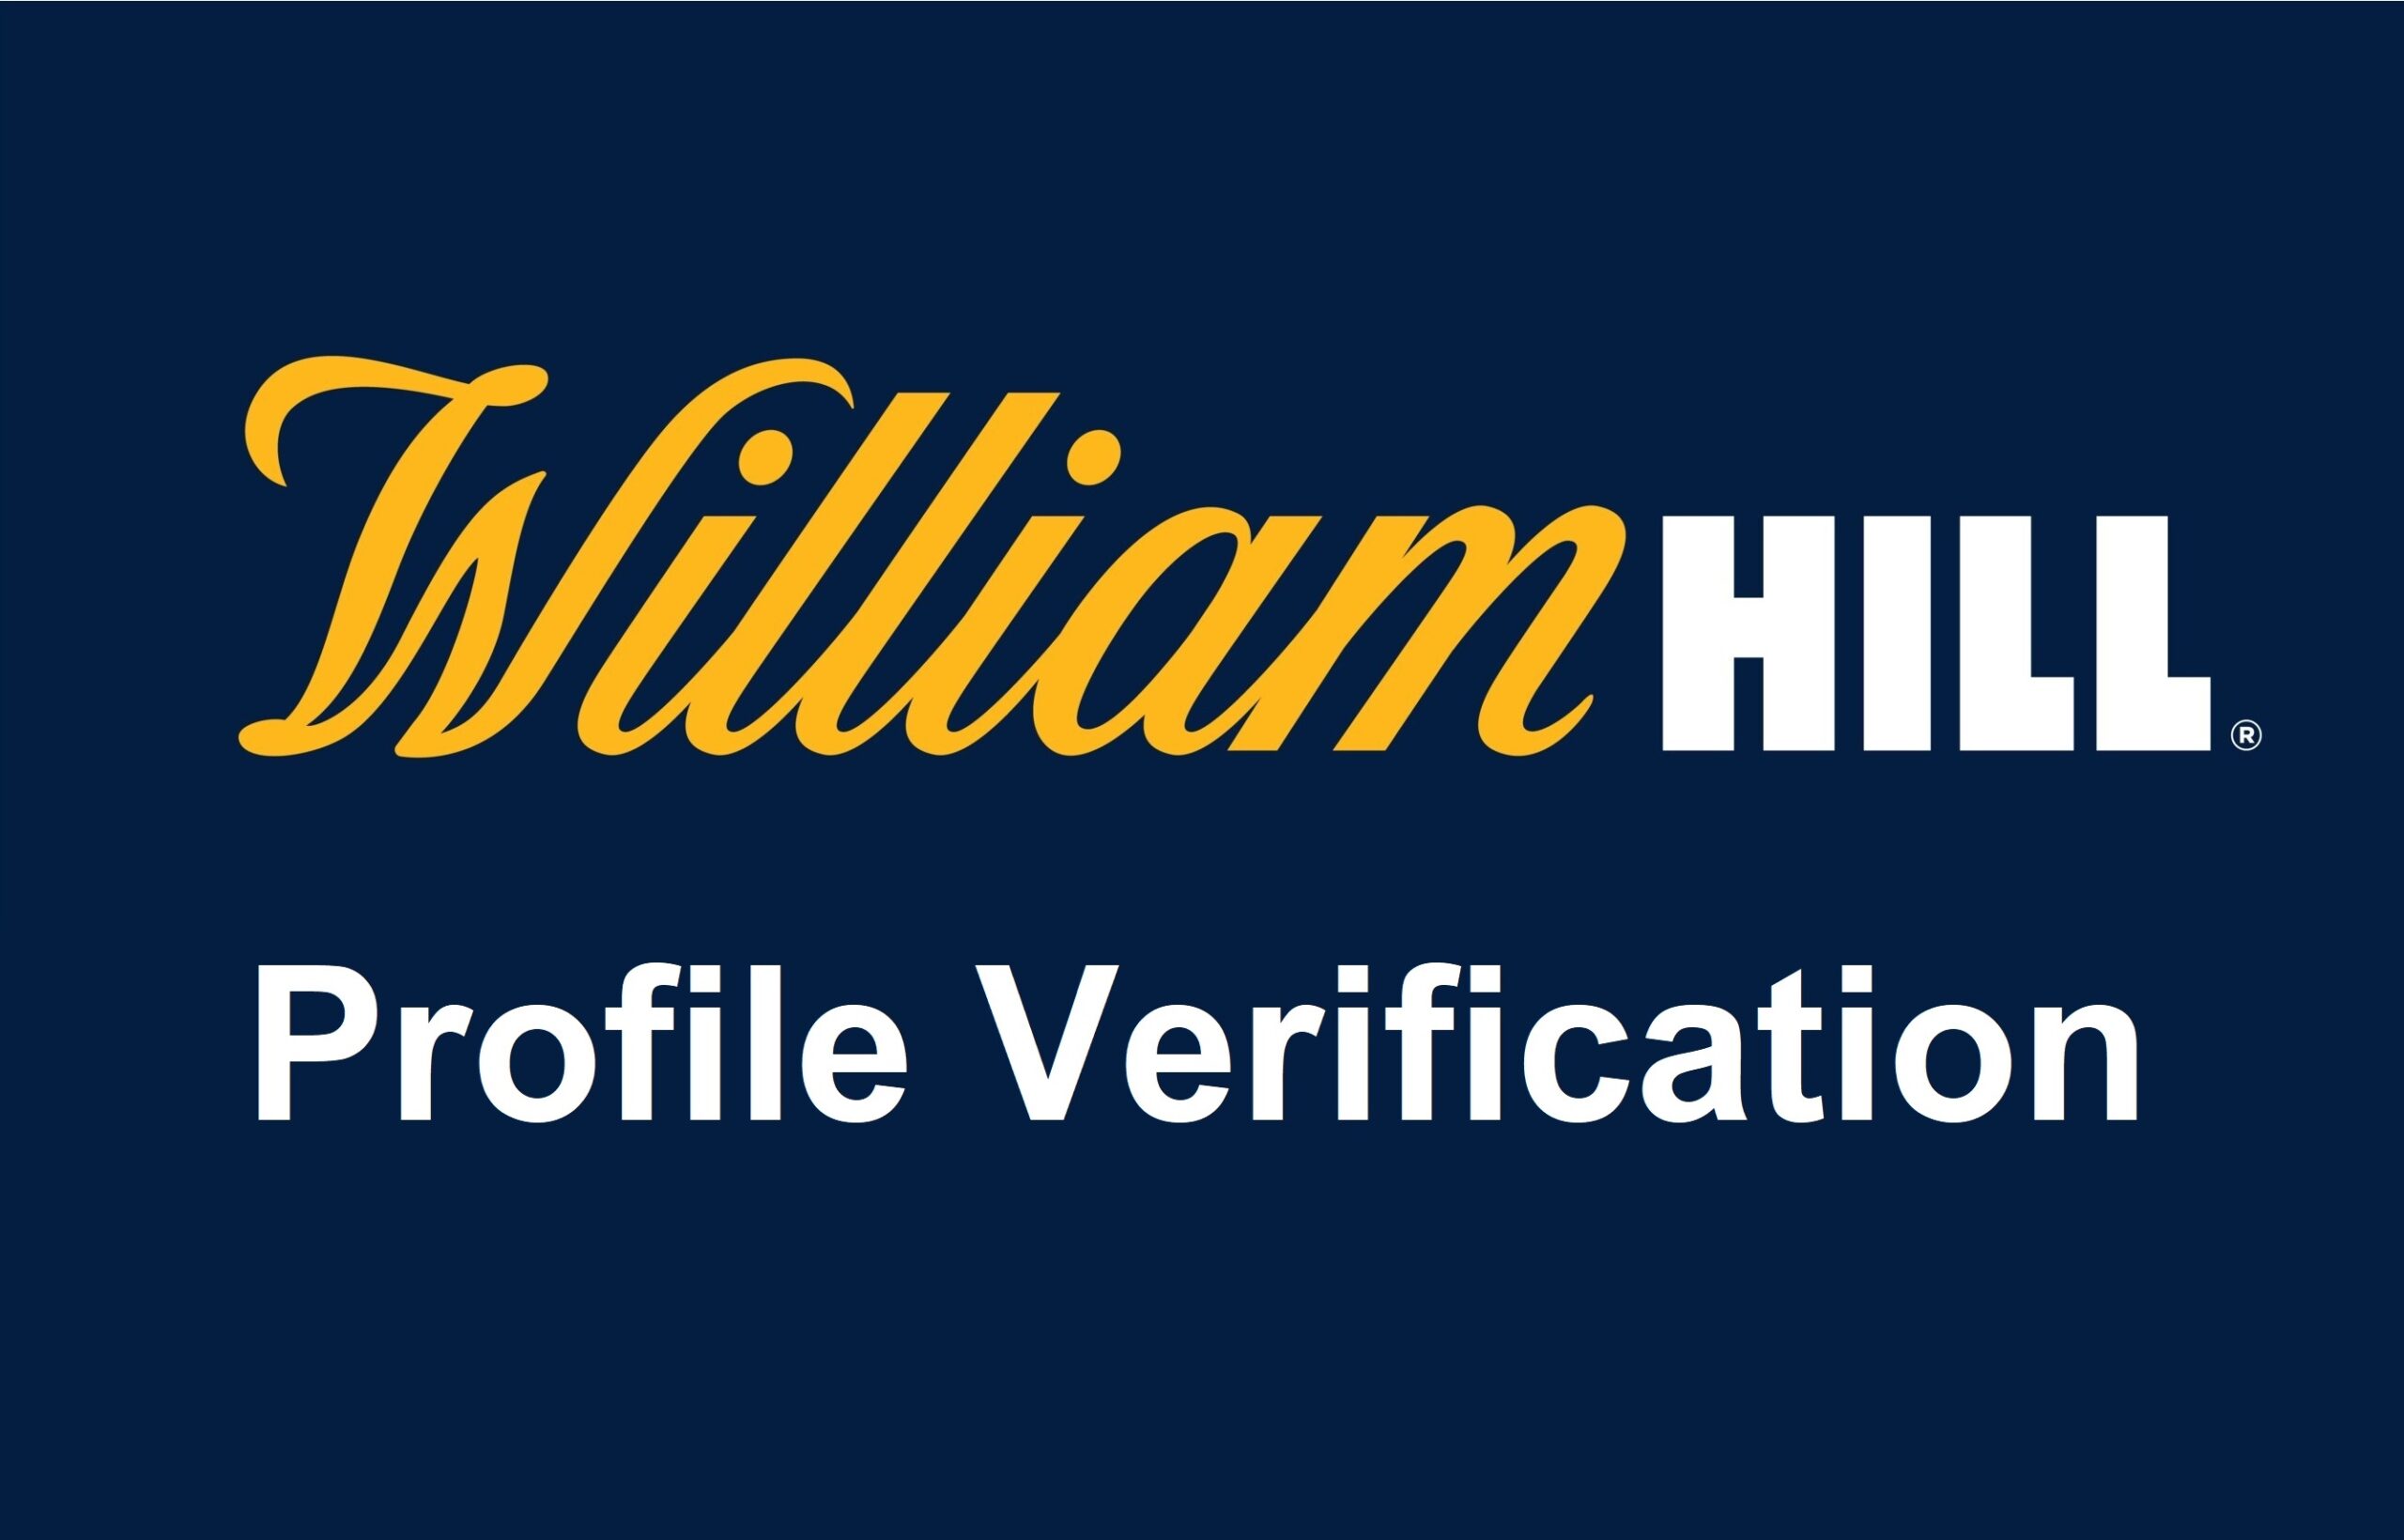 How to verify a profile on William Hill